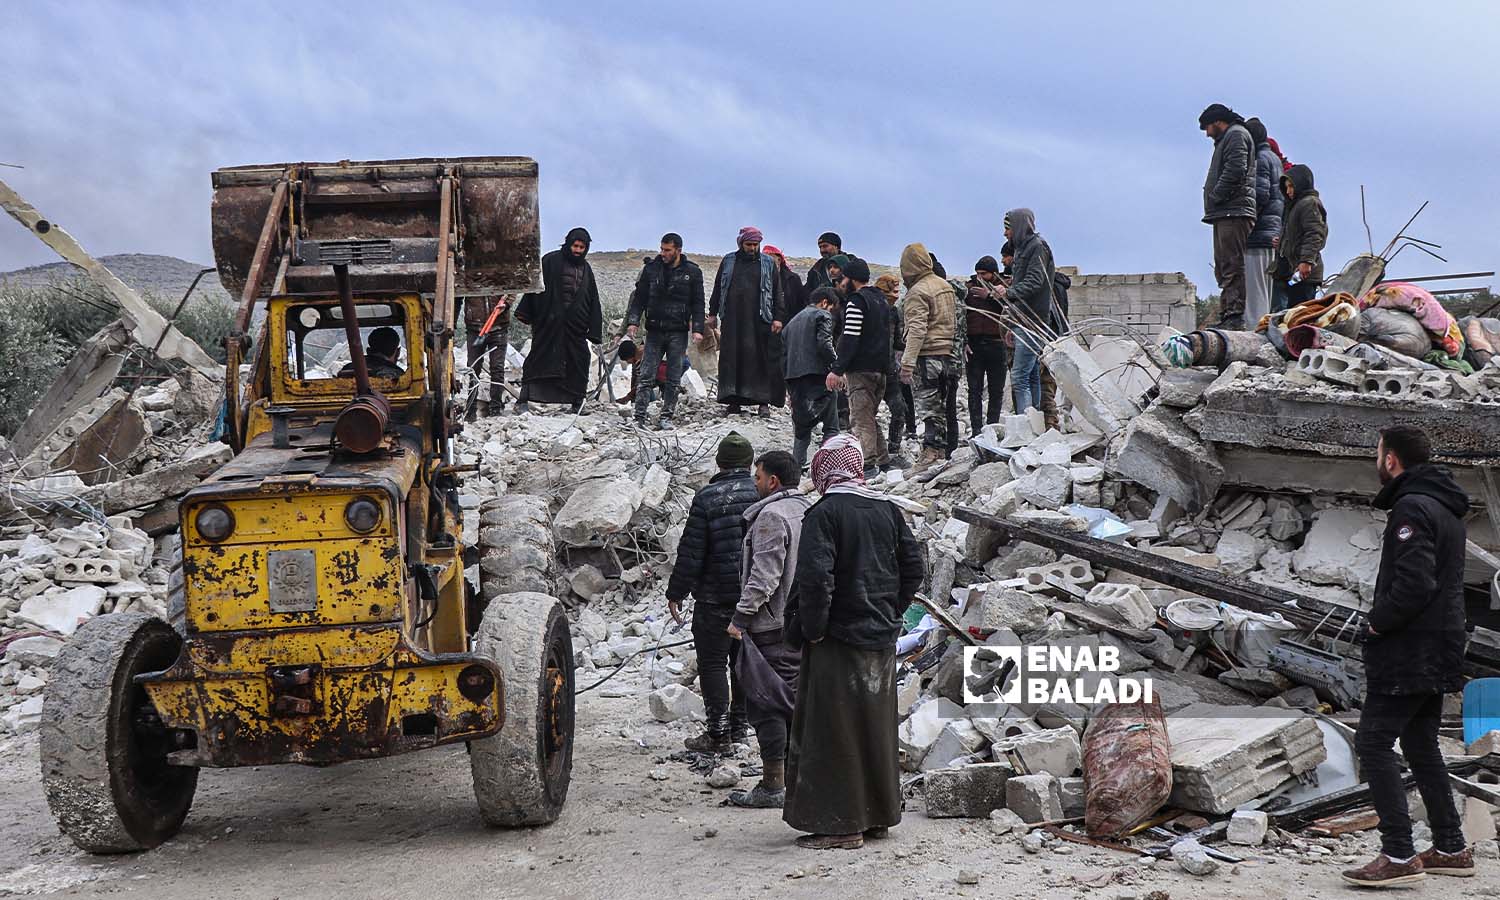 Volunteers try to rescue and lift victims out of the rubble in the Harem area following the devastating earthquake that hit northwestern Syria - 6 February 2023 (Enab Baladi/Mohammad Nasan Dabel)
